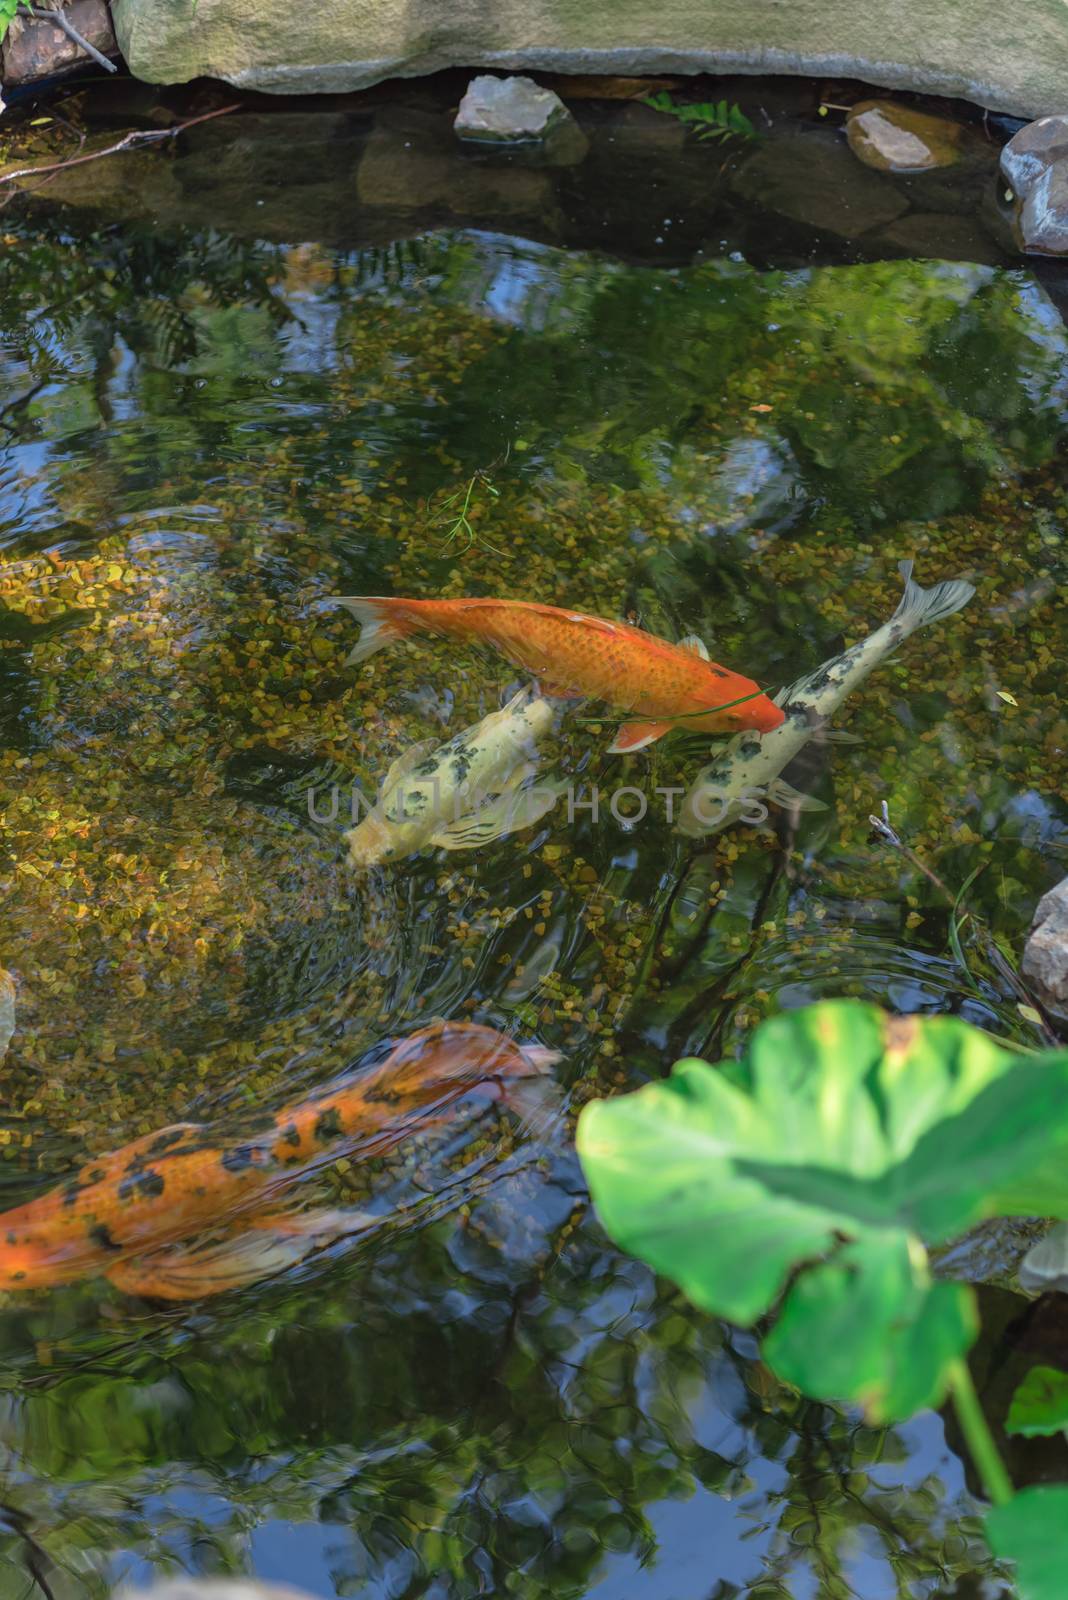 Tropical plant at water garden with colorful koi fishes swimming near Dallas, Texas, USA by trongnguyen